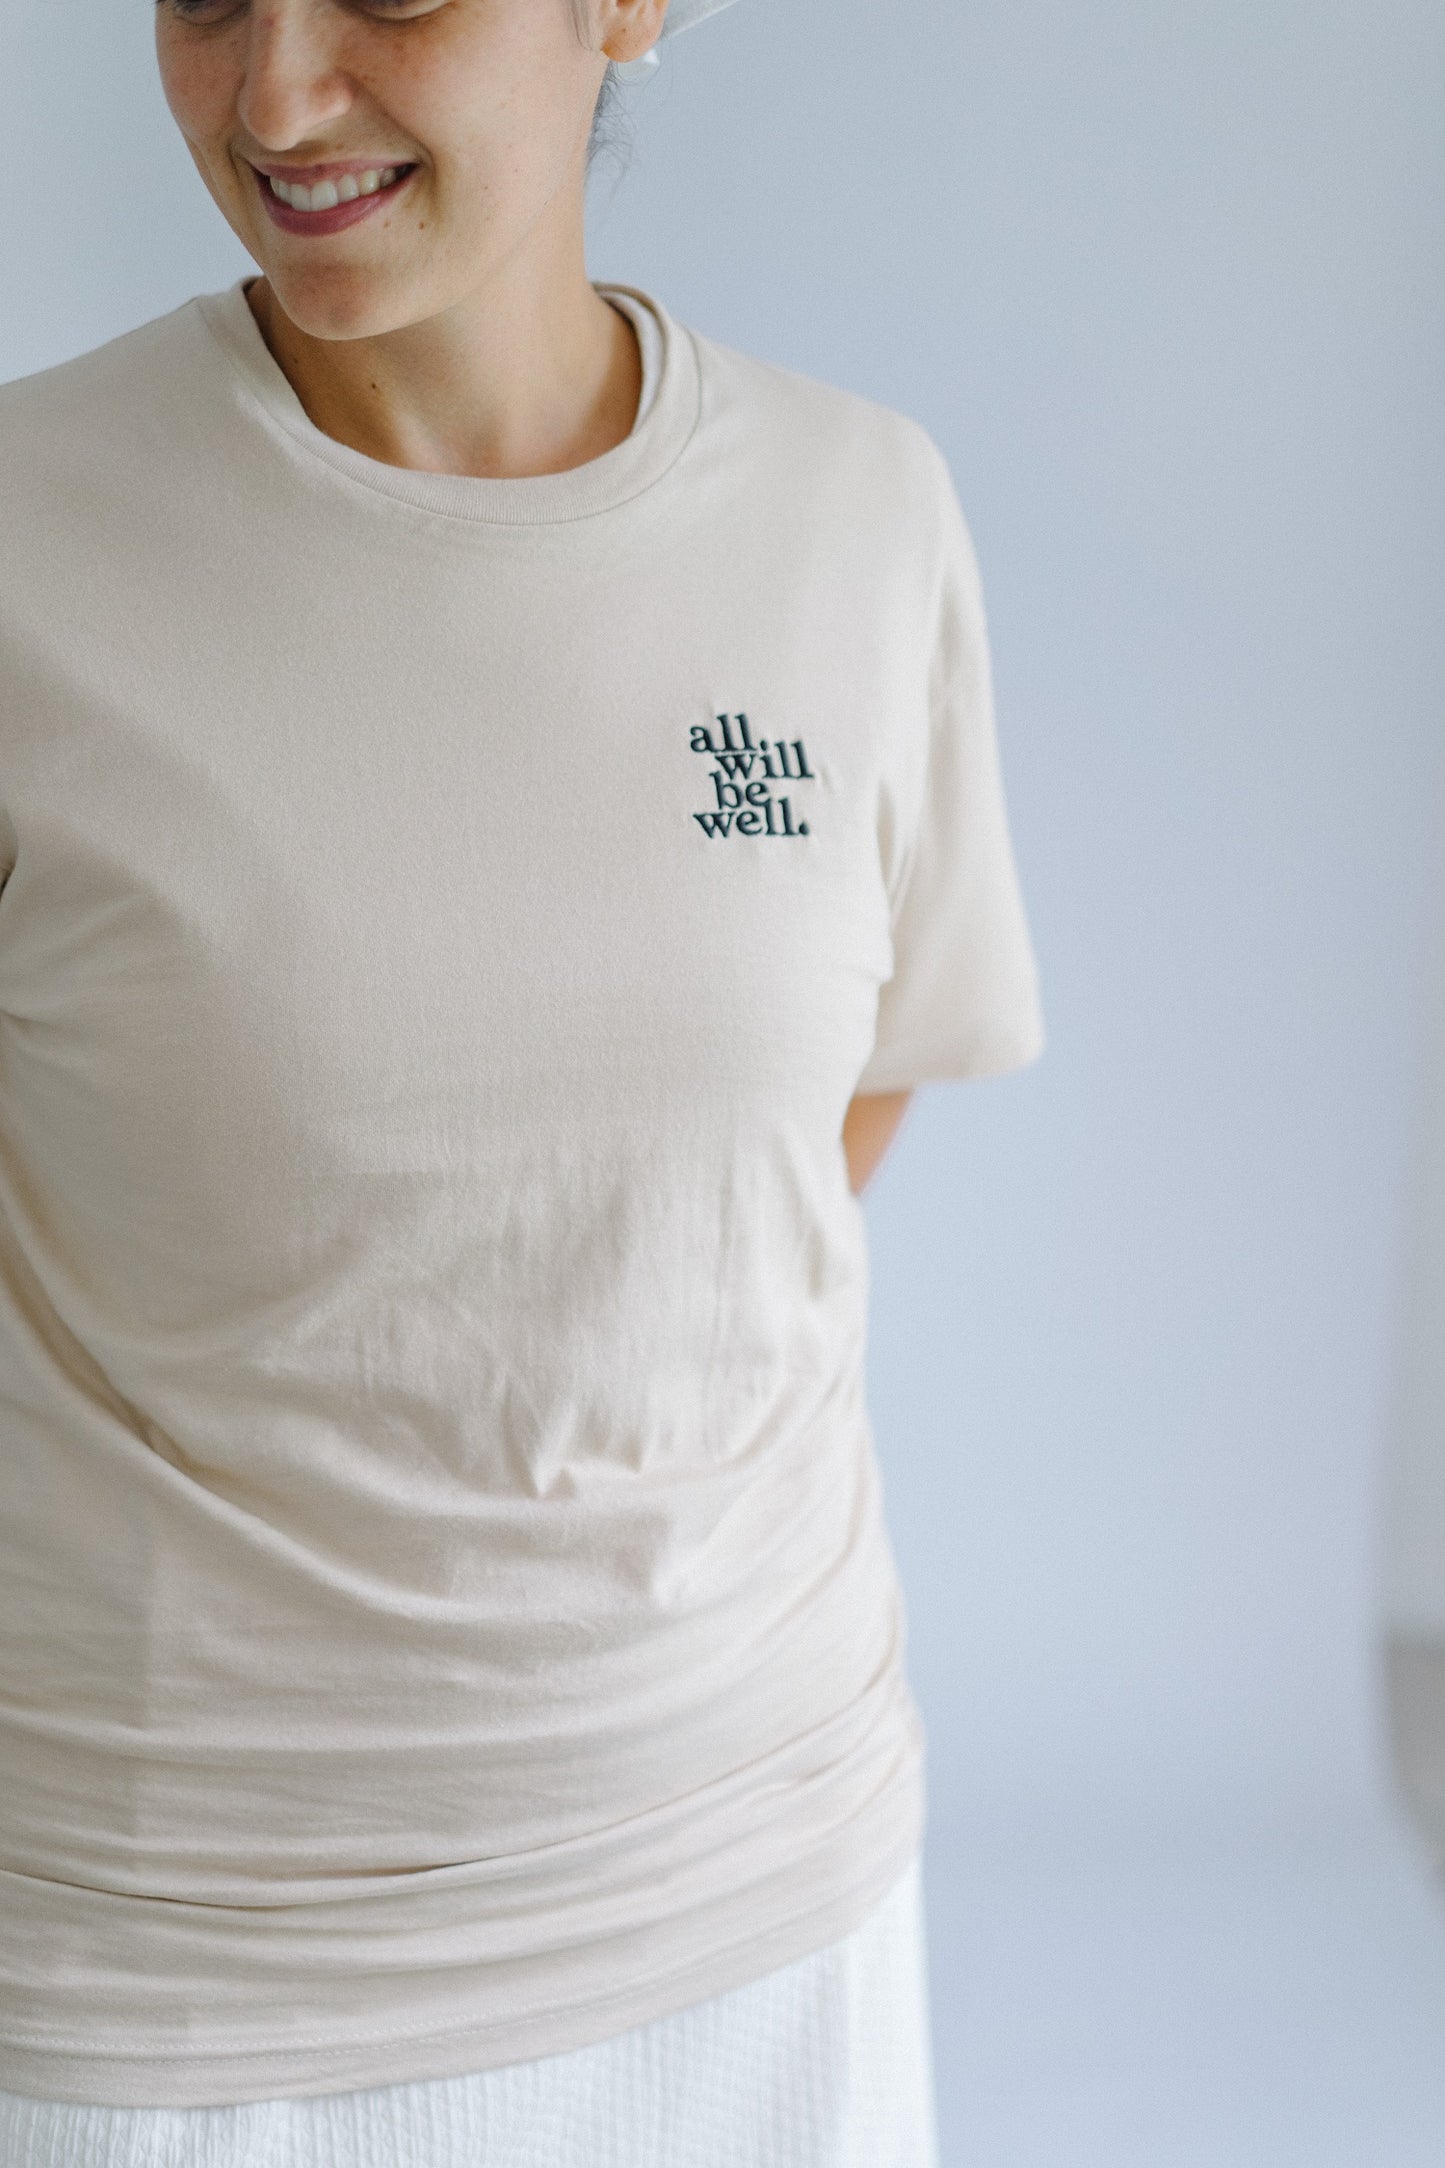 "All Will Be Well" Unisex T-Shirt (embroidered)